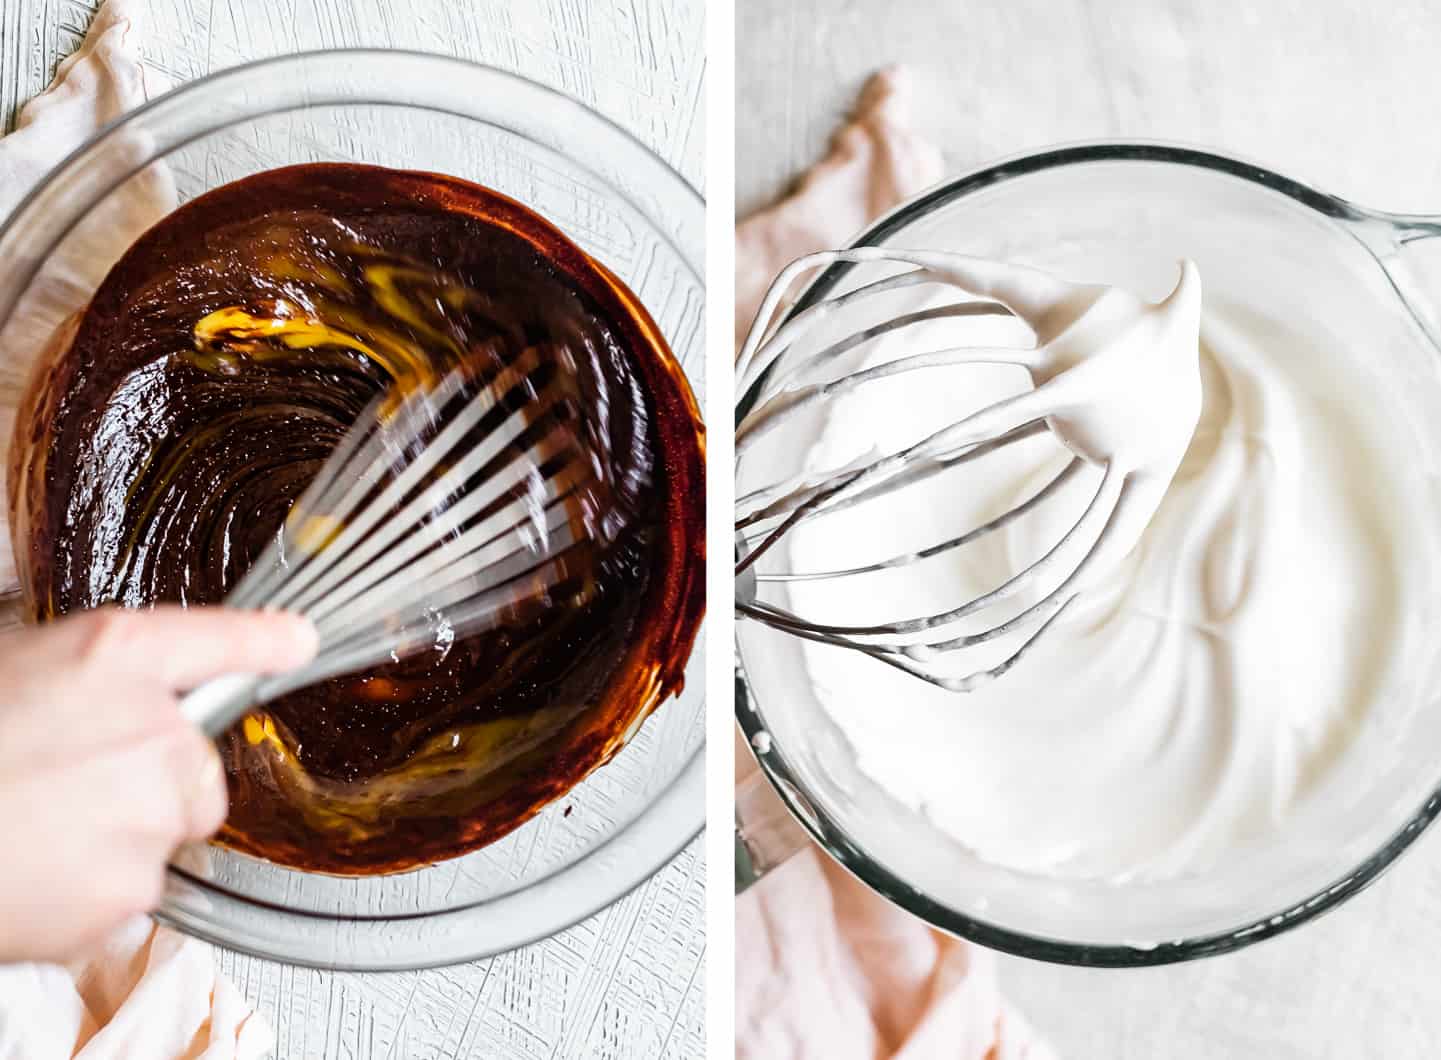 How to make flourless chocolate cake with whipped egg whites